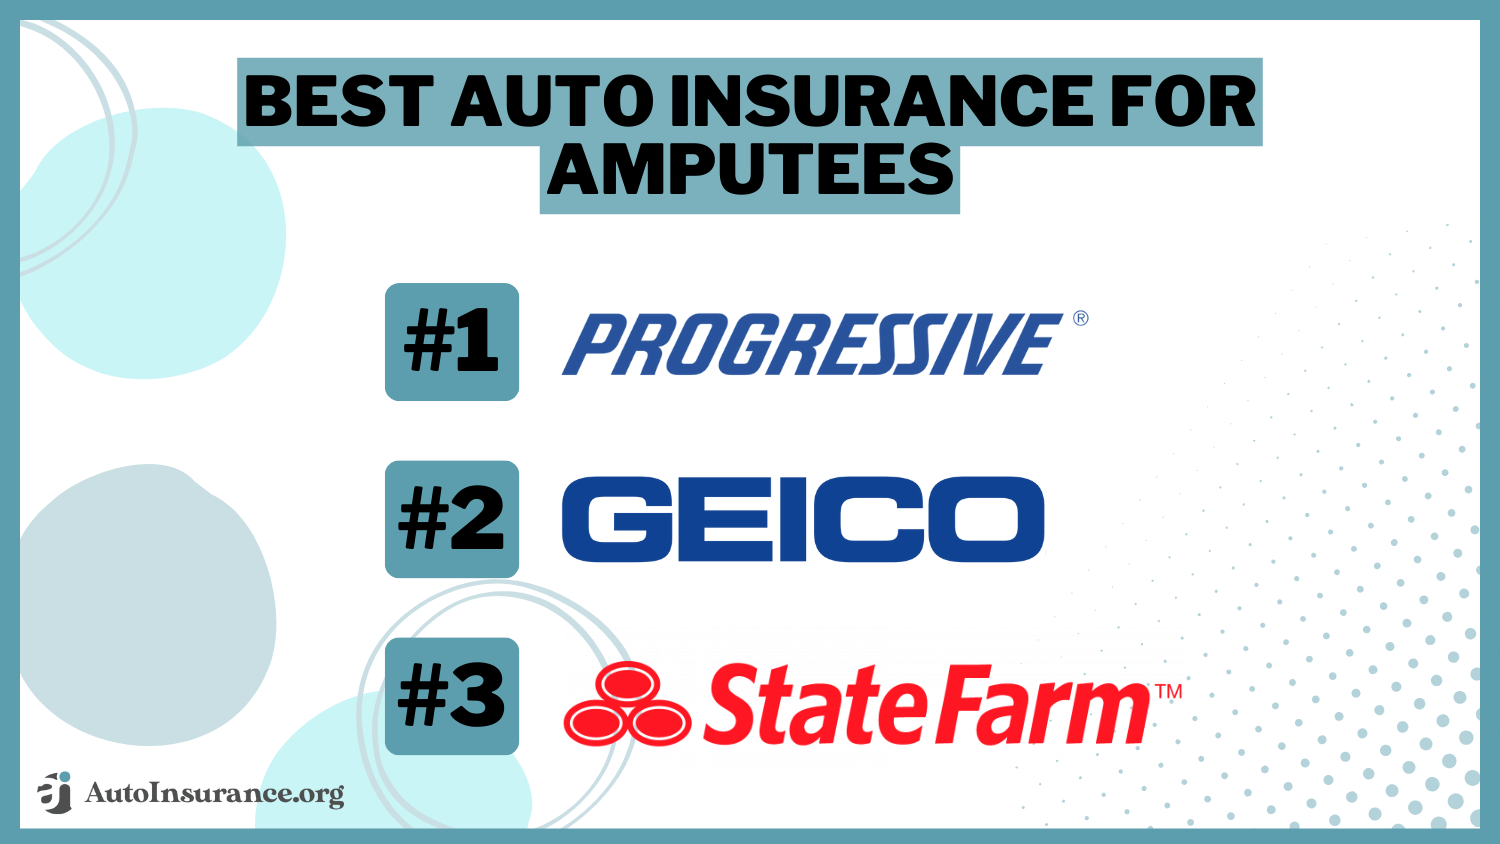 Best Auto Insurance for Amputees: Progressive, Geico, State Farm